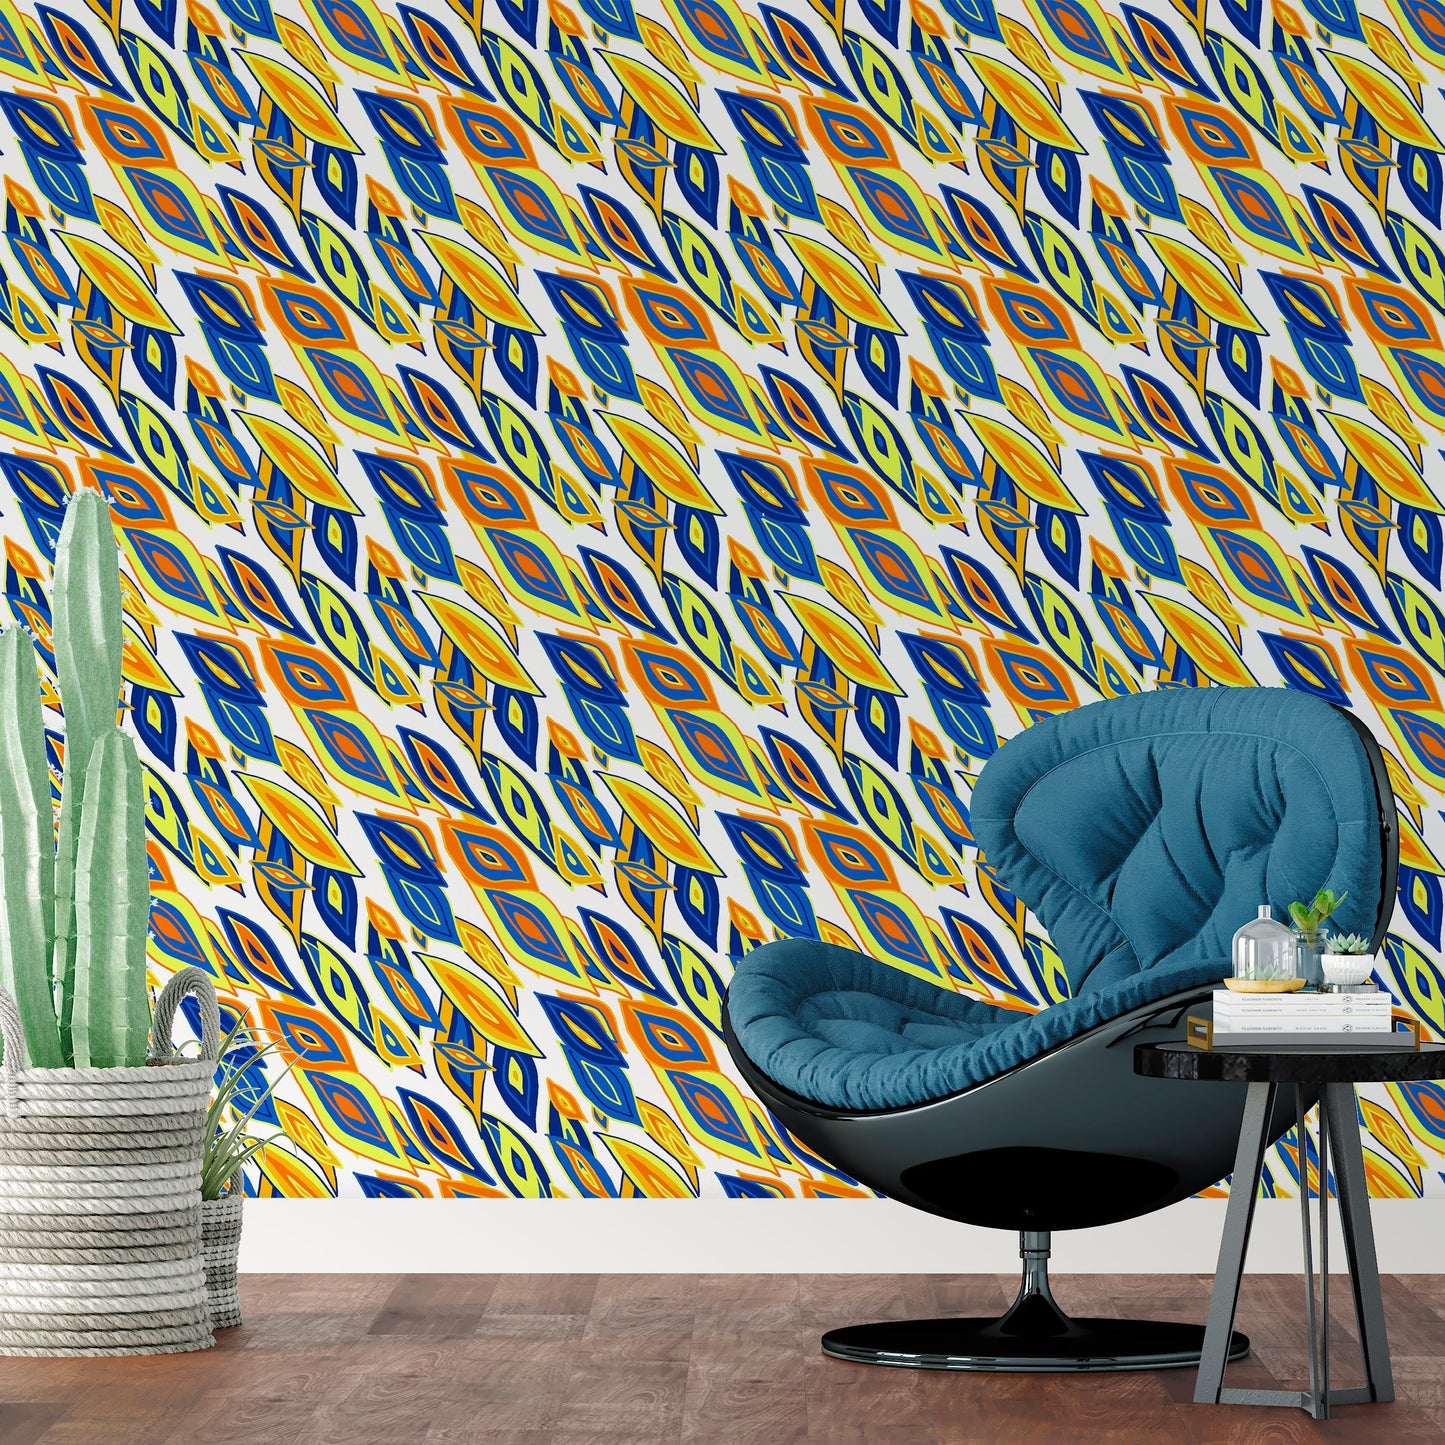 Doodle Wallpaper Peel and Stick, Colorful Wallpaper, Bright Abstract Wallpaper, Removable Wall Paper